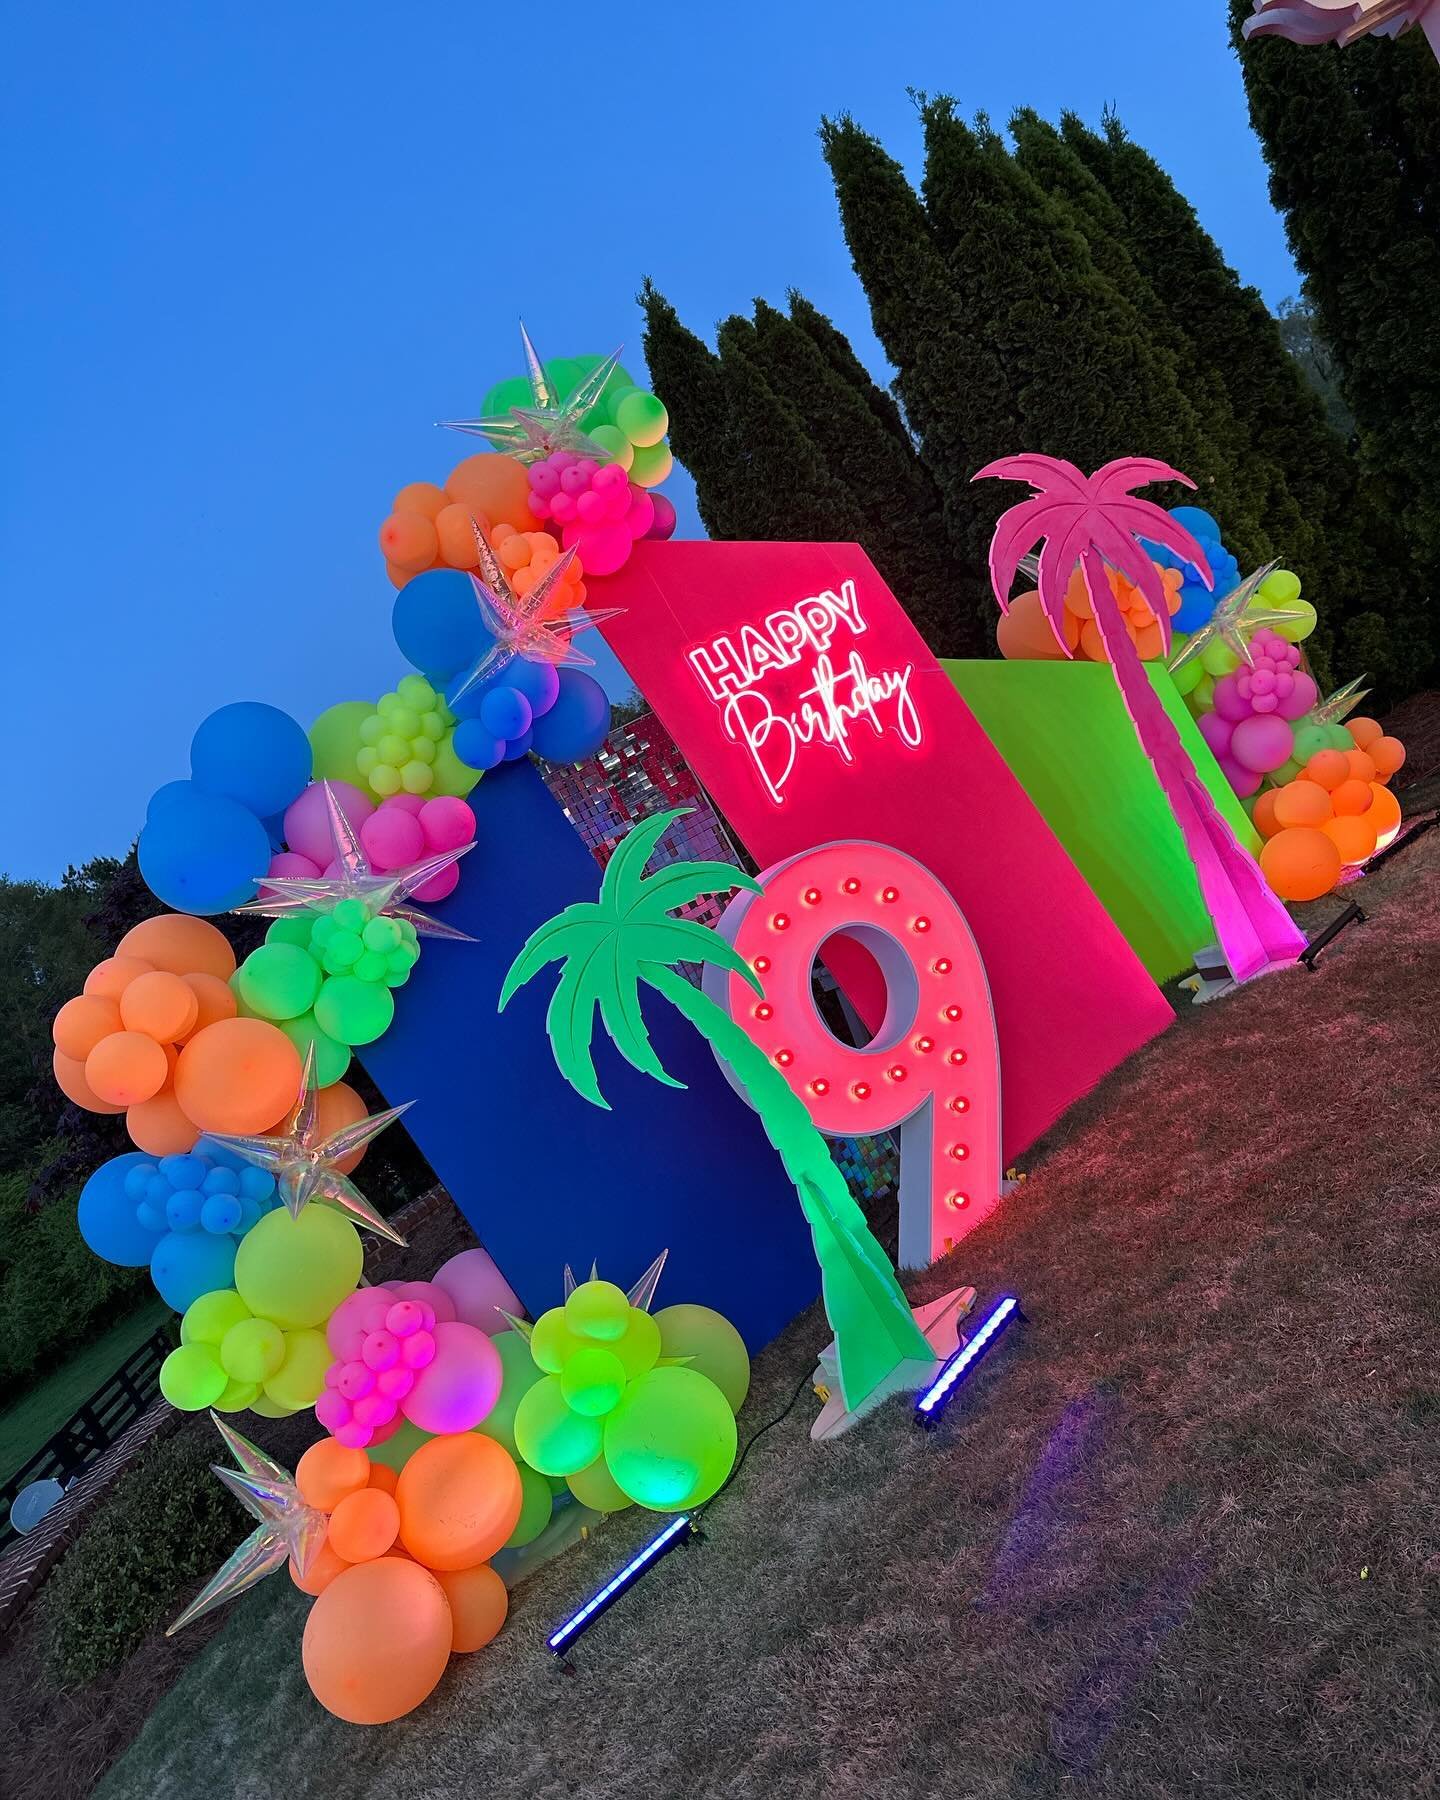 You have to have a glowing backdrop for a neon pool party 🌴 💚🧡🩷🩵

#neonparty #glowparty #glow #partyideas #balloonstylist #balloongarland #balloondecor #tabledecor #tablescapes #backdrop #atlevents #atleventplanner #atlparties #girlsbirthday